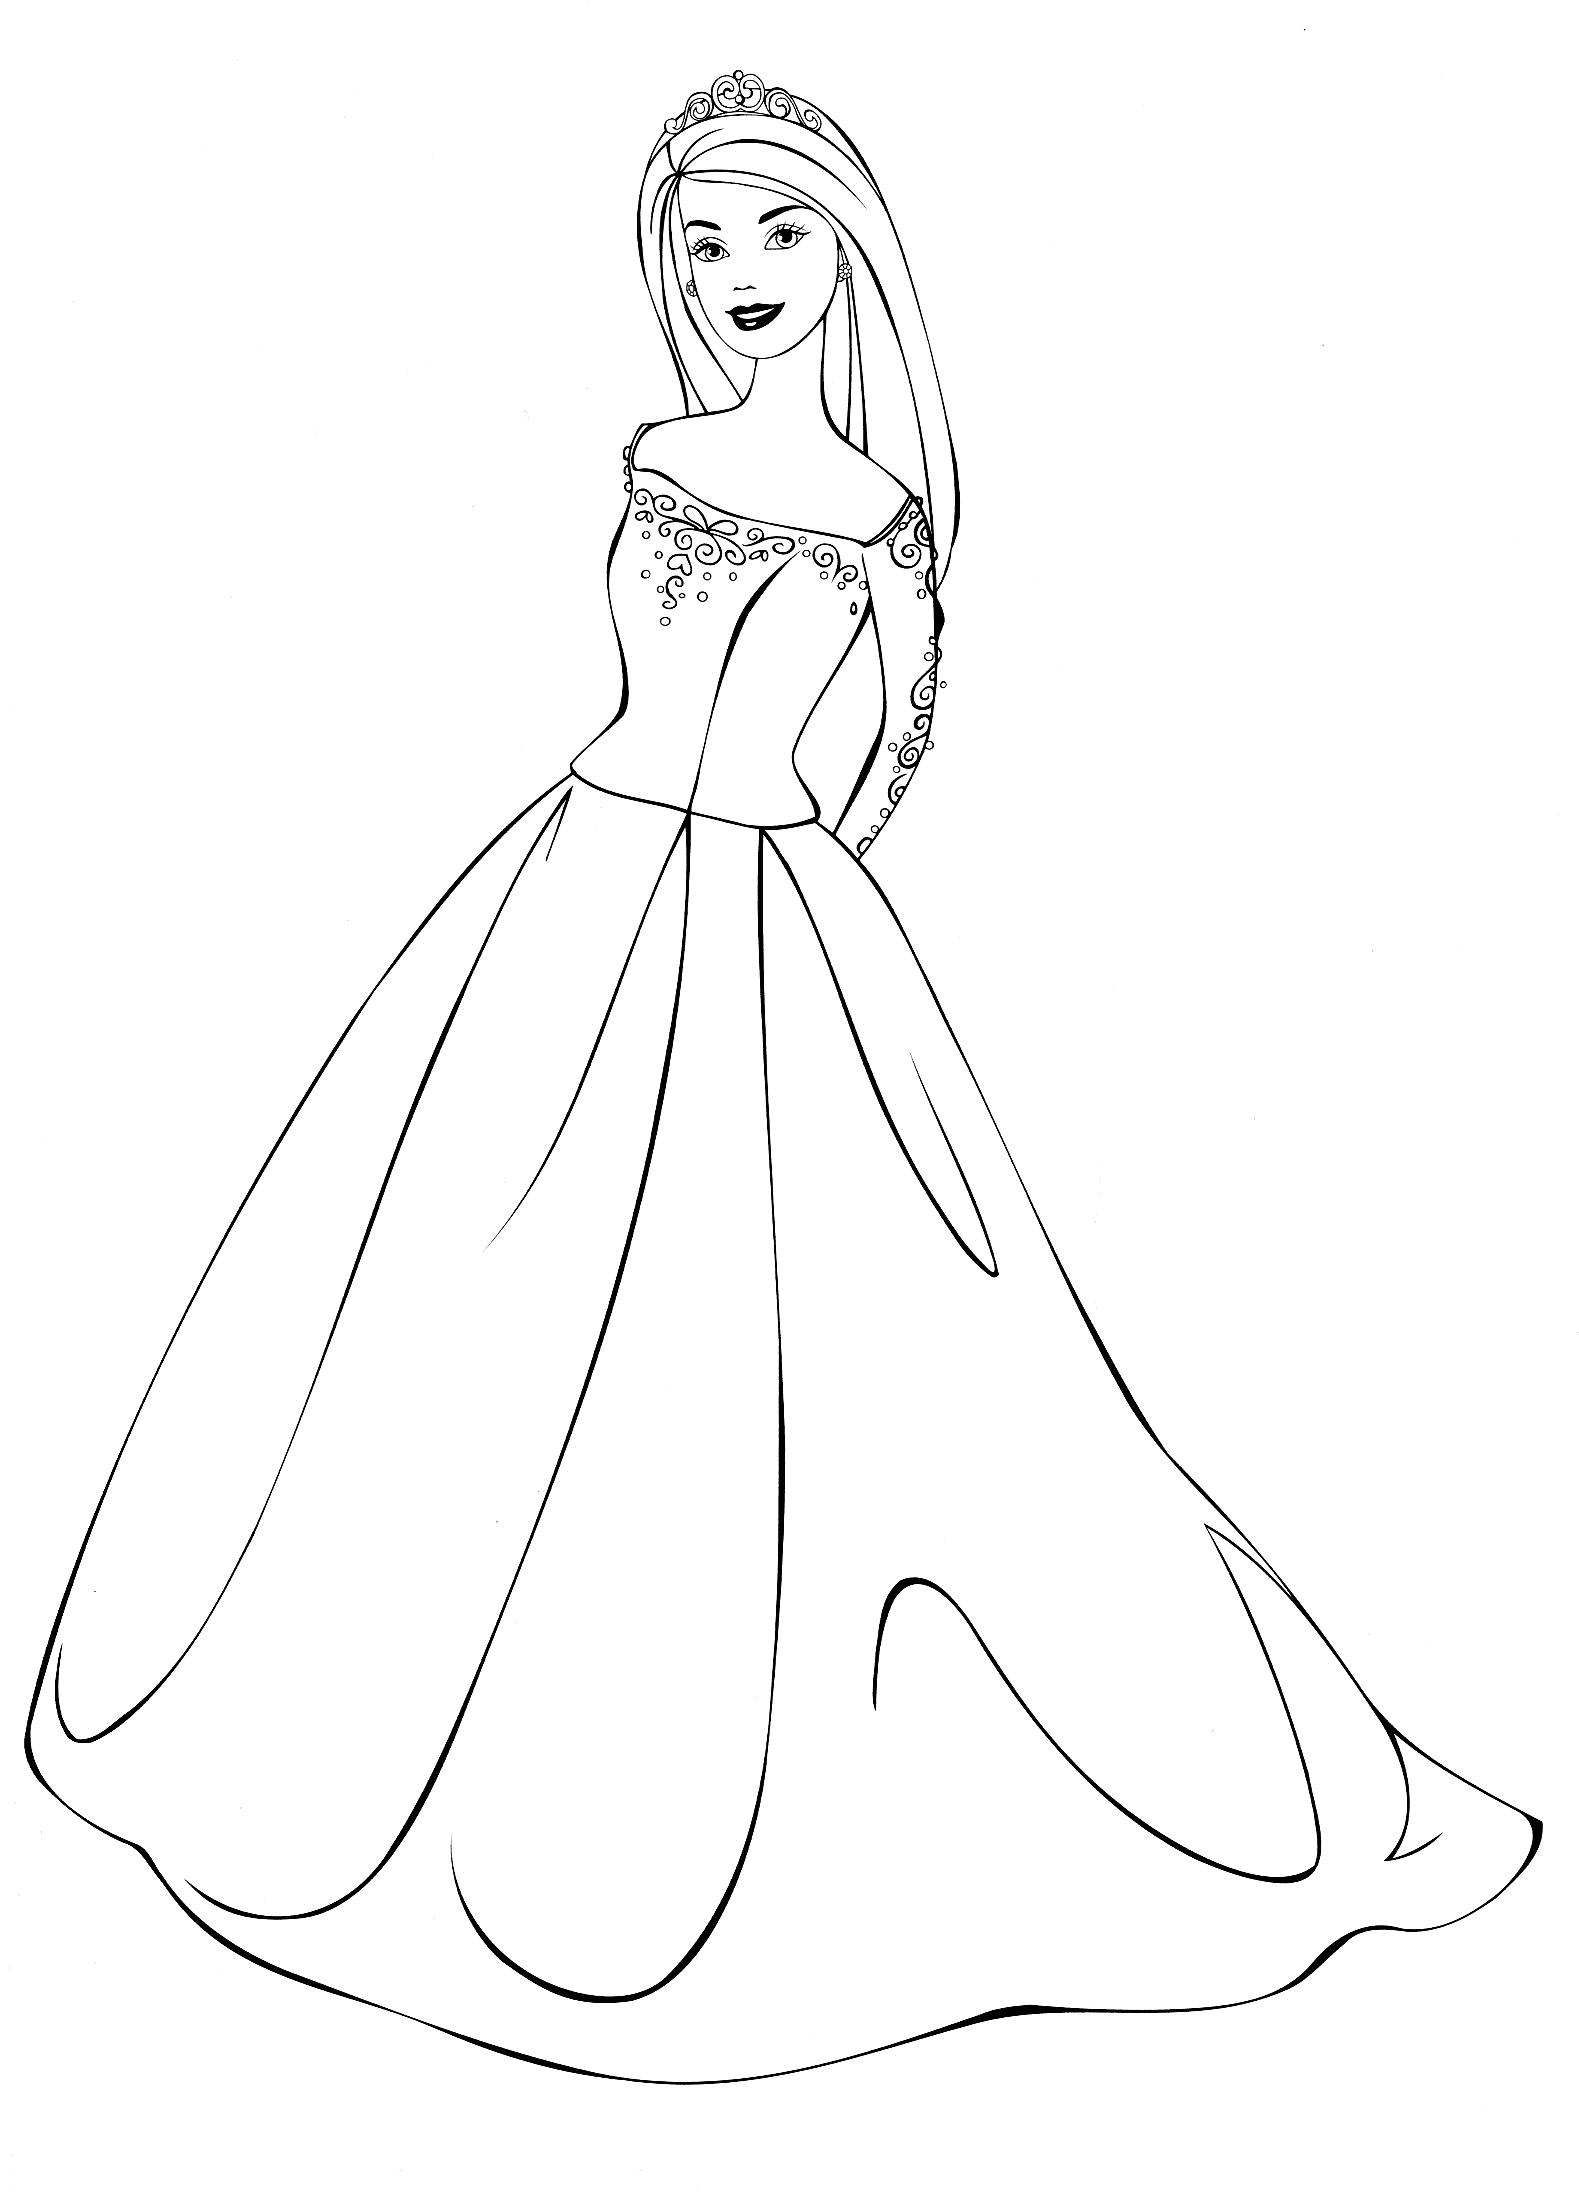 Coloring page - Barbie in a wedding dress